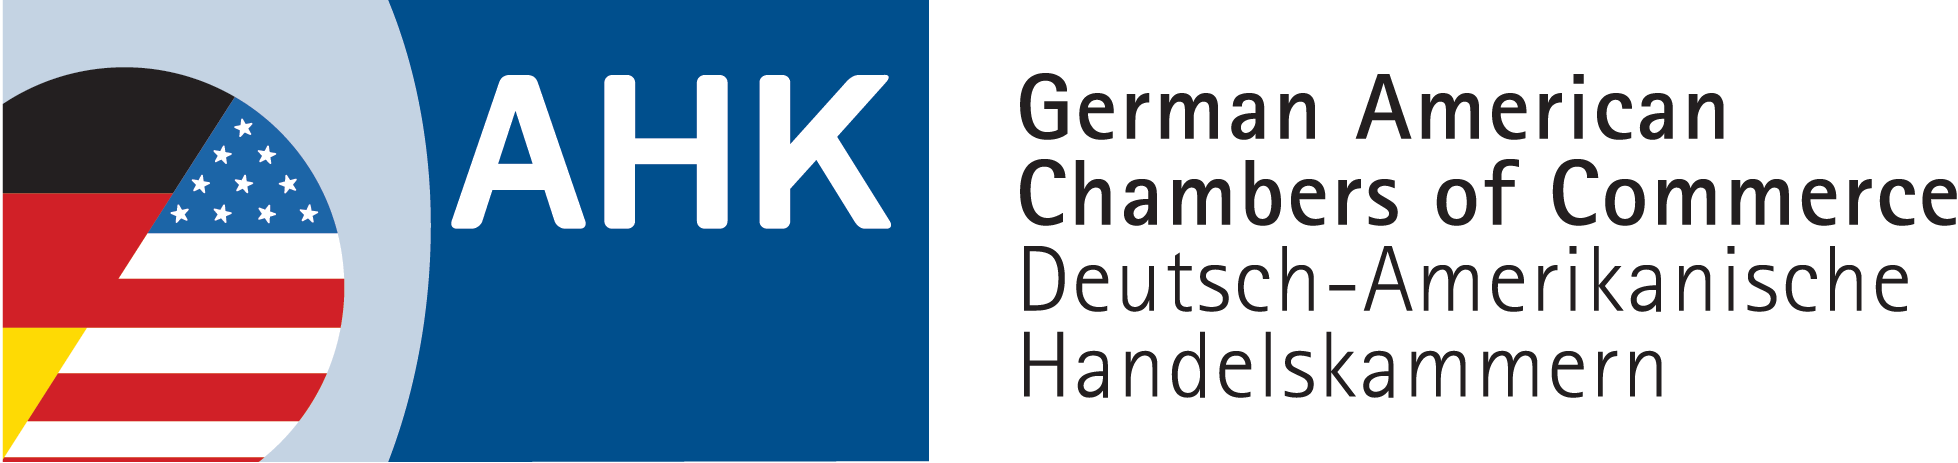 GACC Midwest German American Chamber of Commerce Certification Assessments